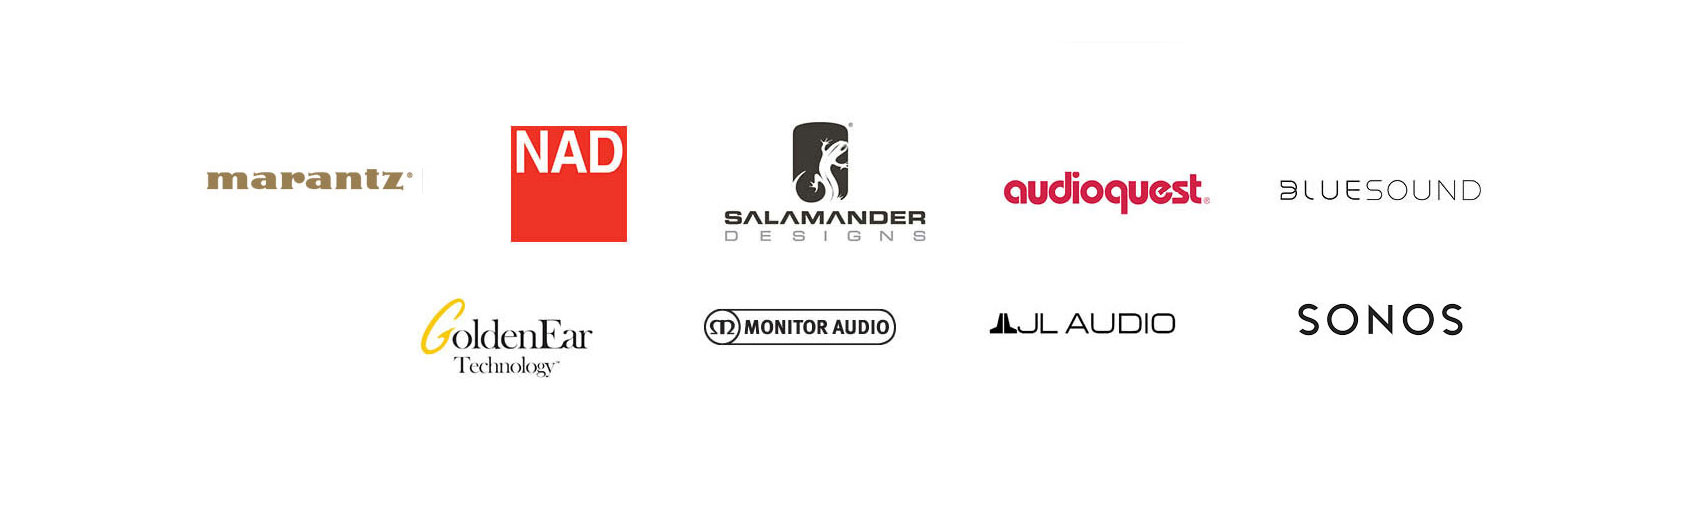 home audio and stereo companies